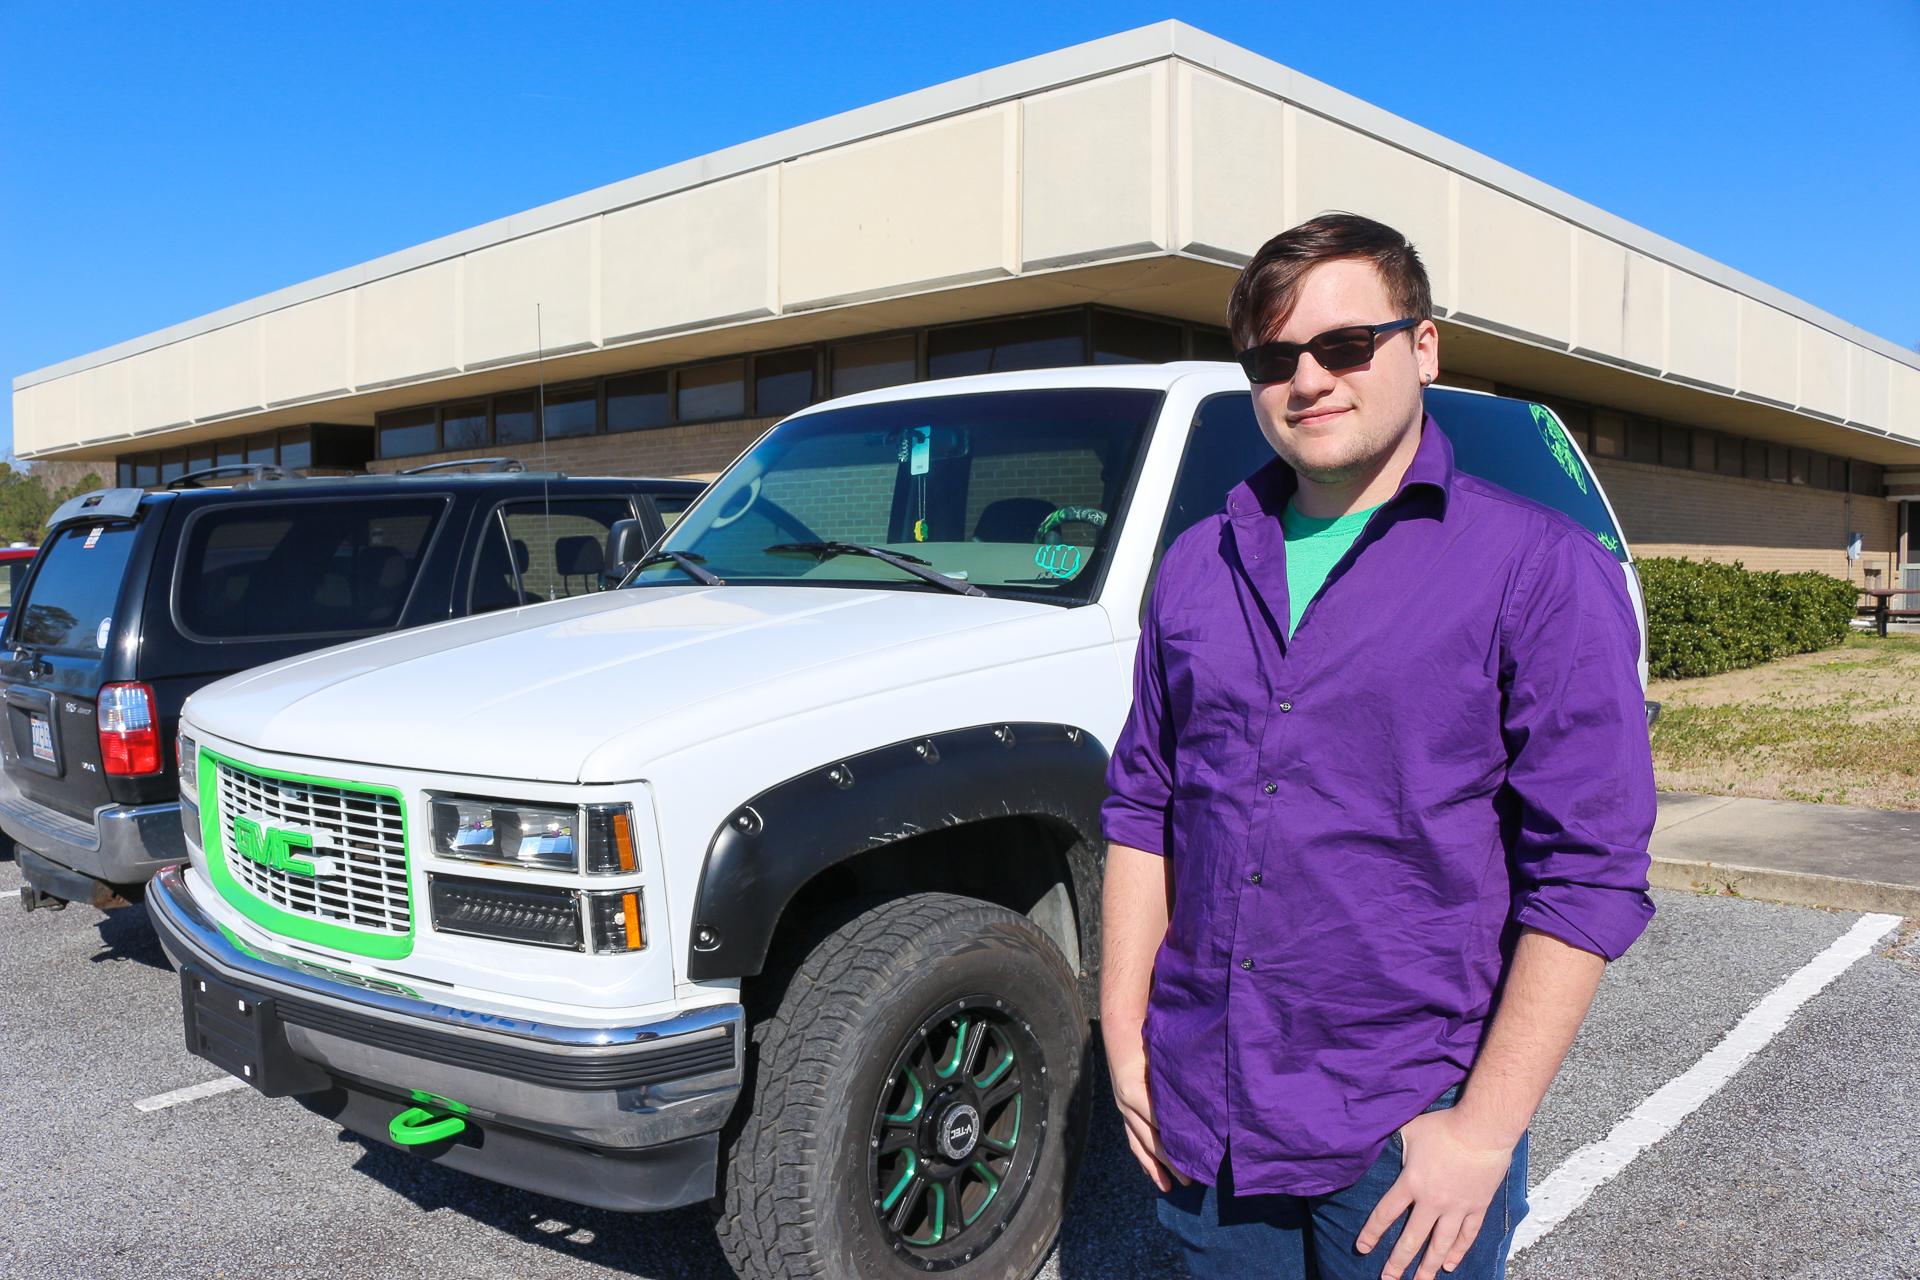 A man in a purple shirt stands in front of a white SUV.